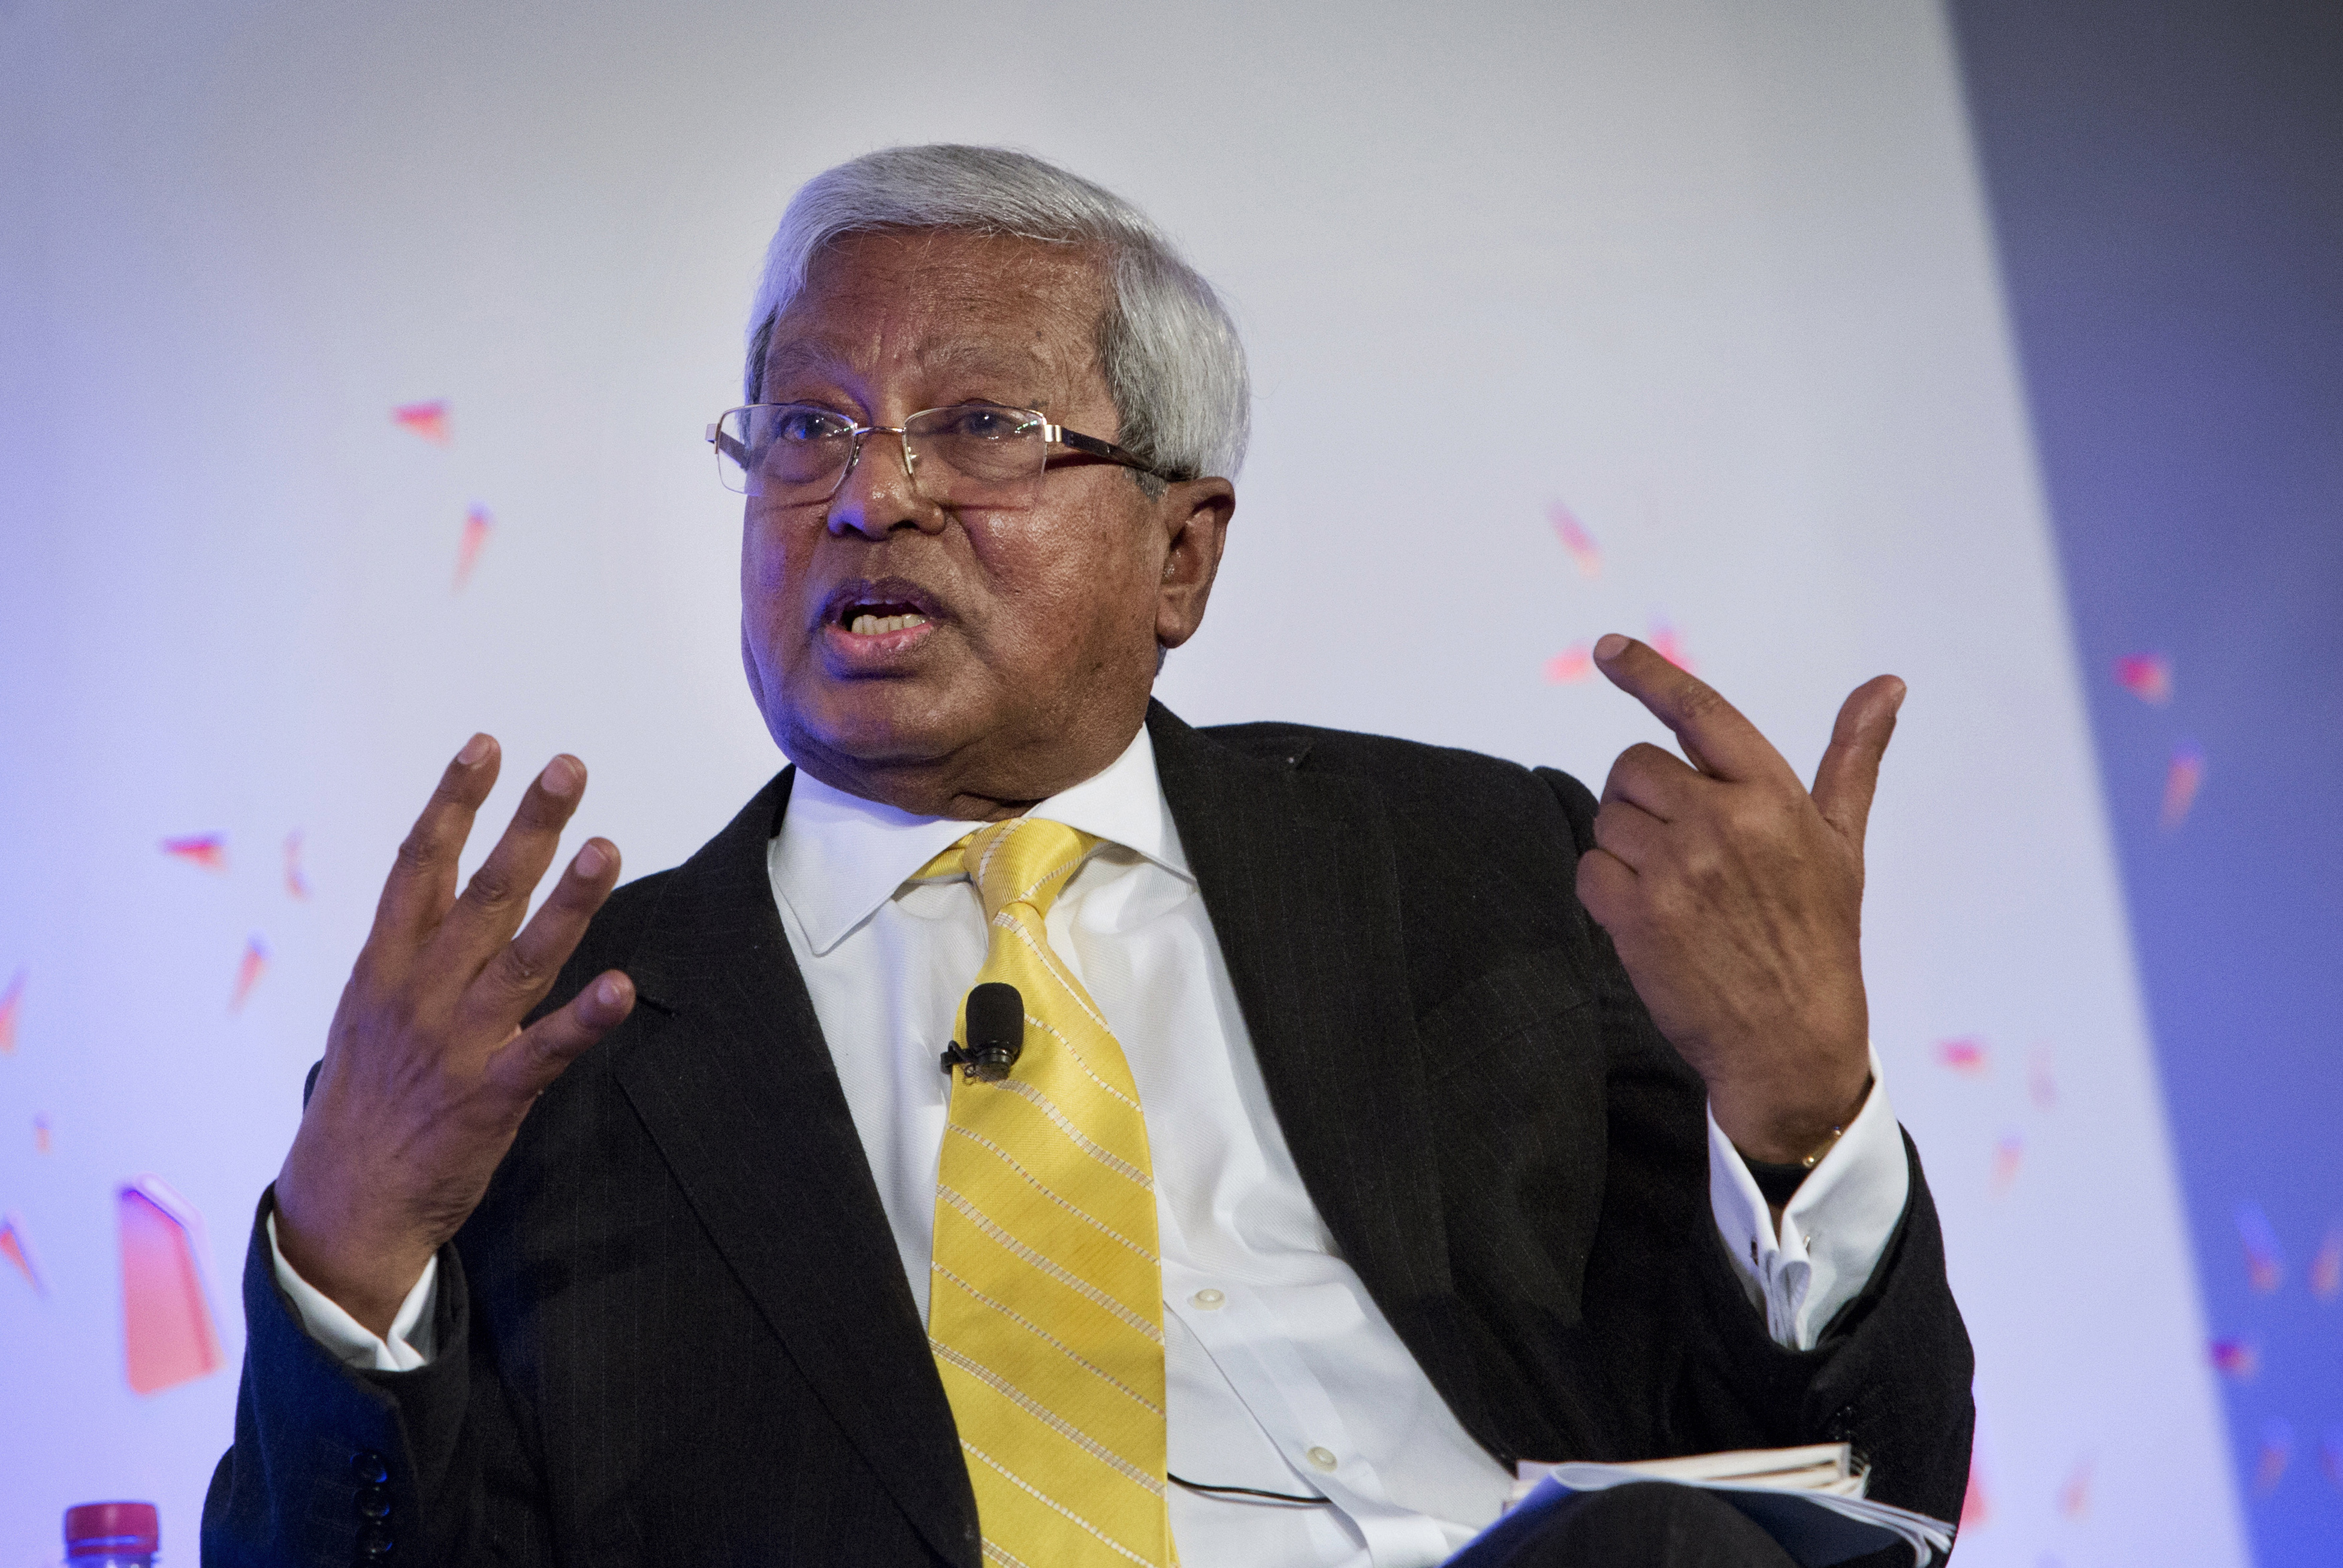 Fazle Hasan Abed, chairman of BRAC Bank Ltd., speaks during the Advancing Asia Conference in New Delhi, India, on Saturday, March 12, 2016. (Kuni Takahashi&mdash;Bloomberg/Getty Images)